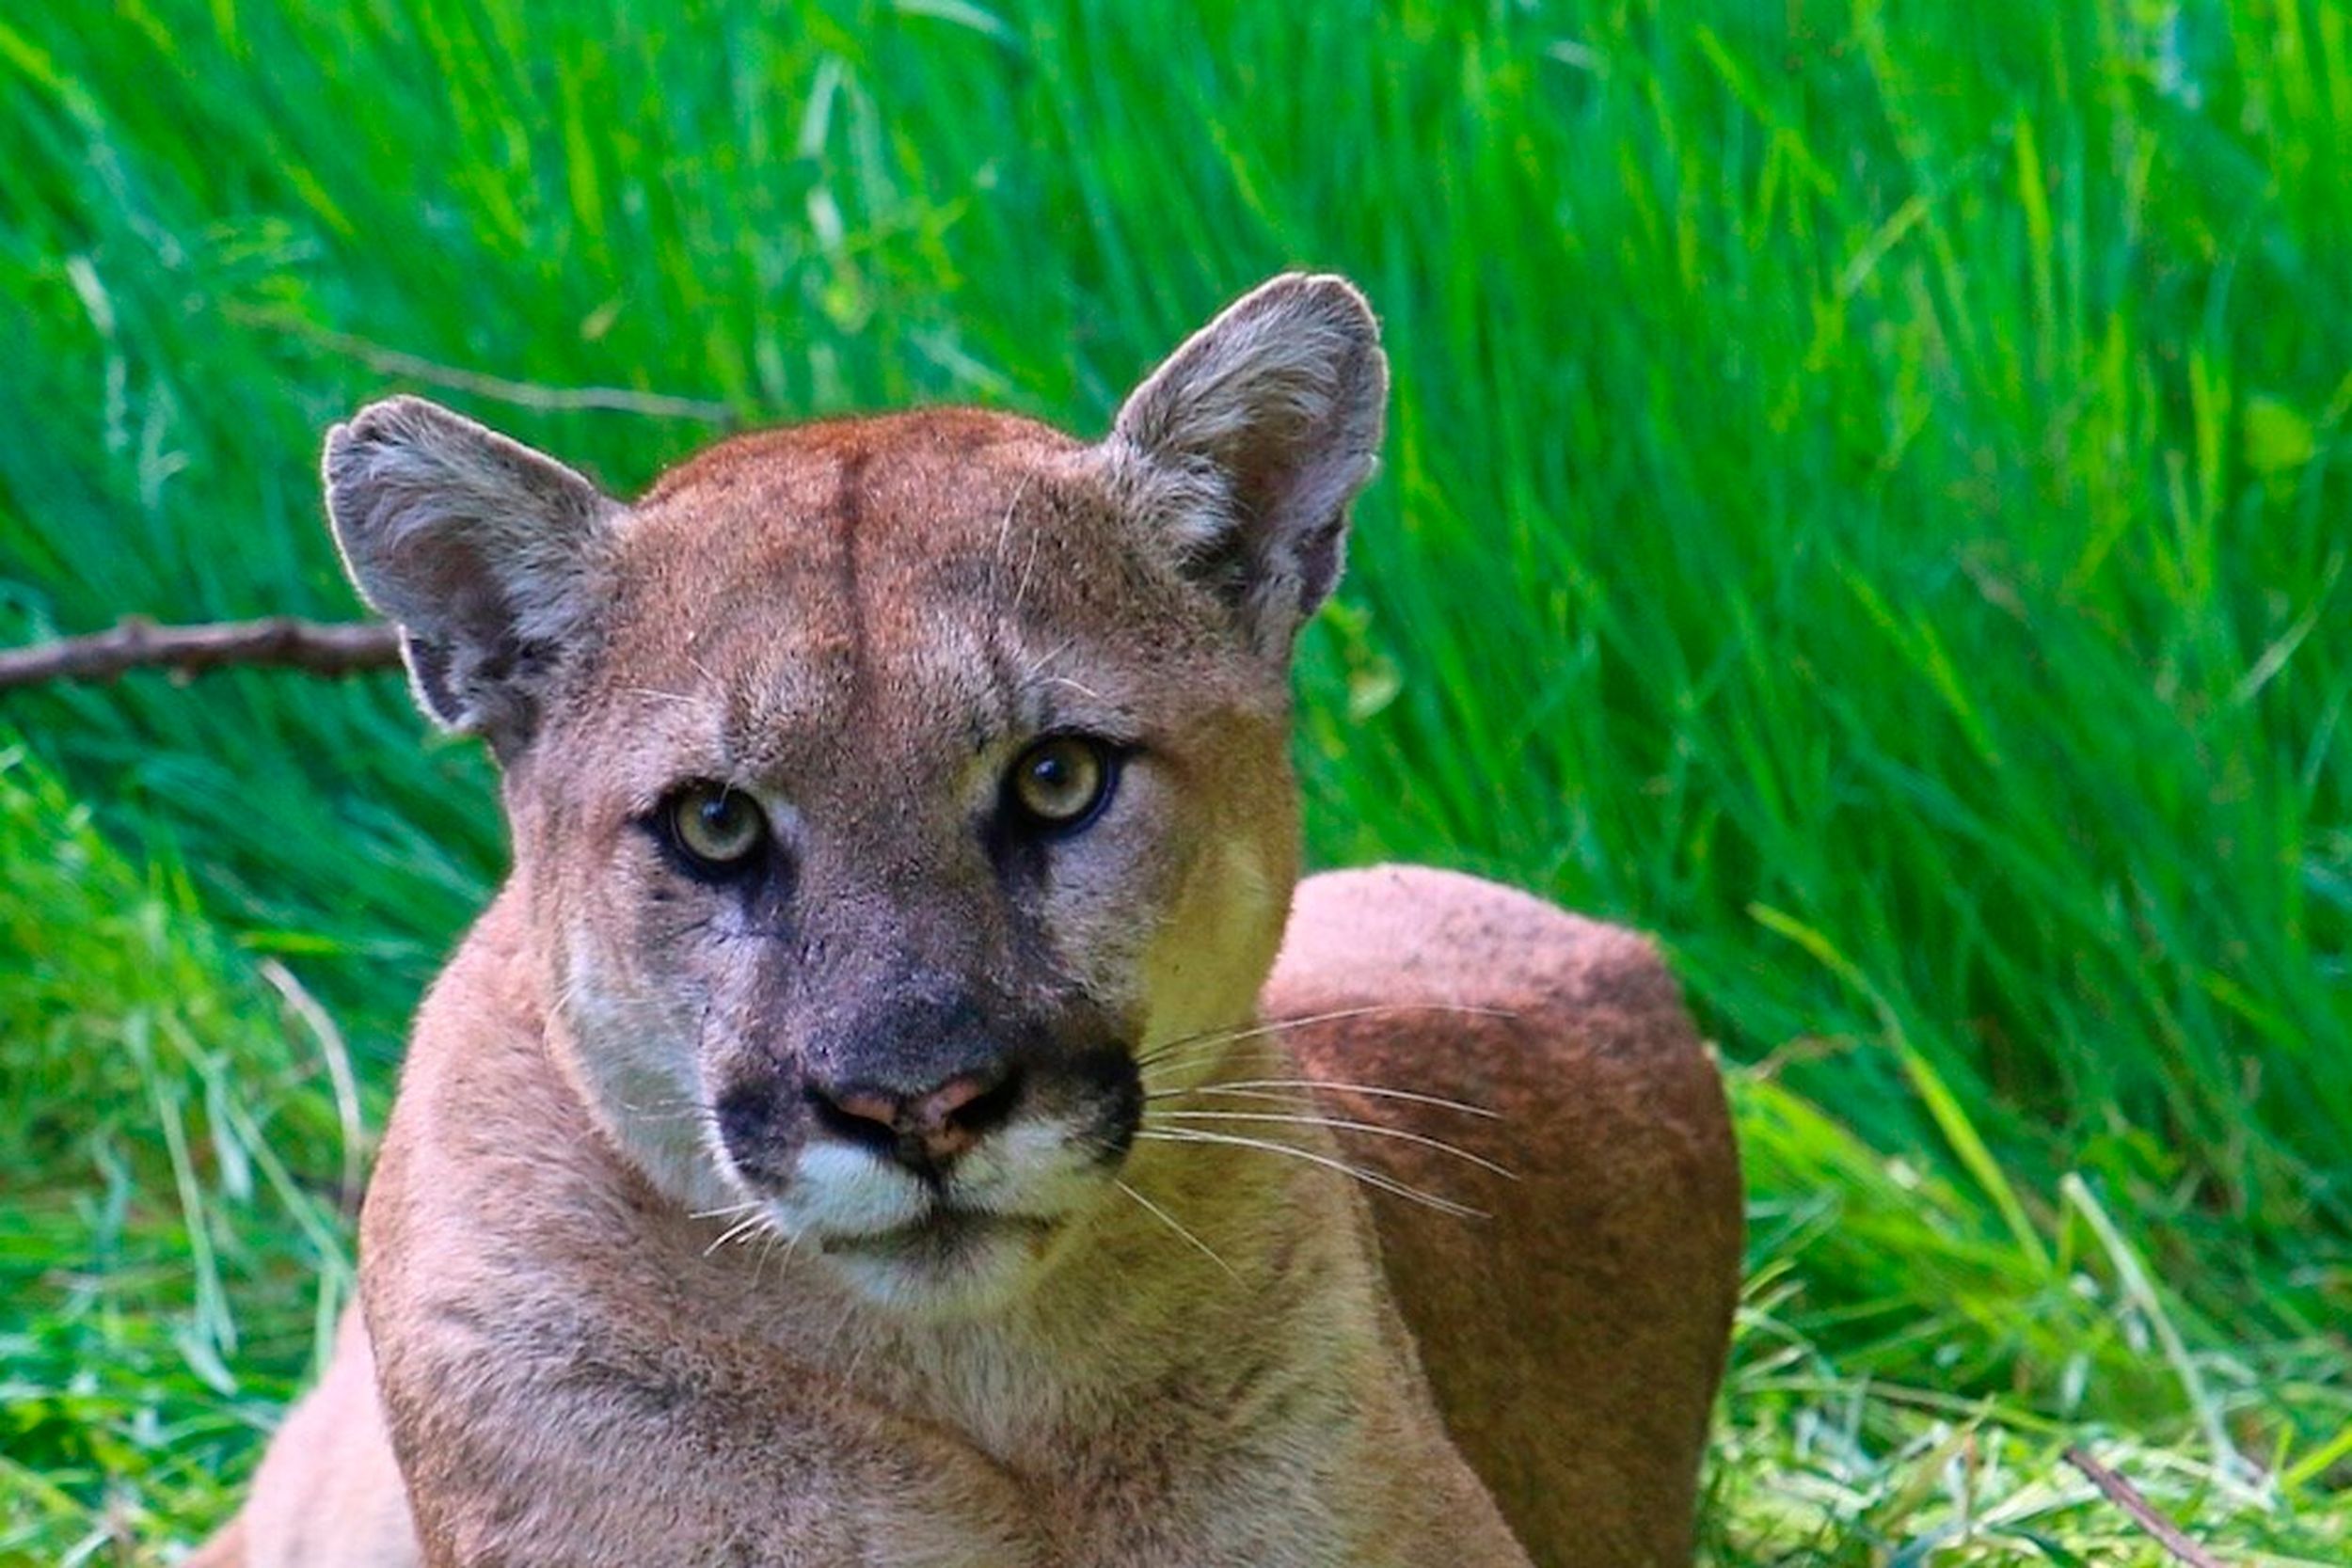 9 Year Old Girl Hospitalized After Cougar Attack In Stevens County The Spokesman Review